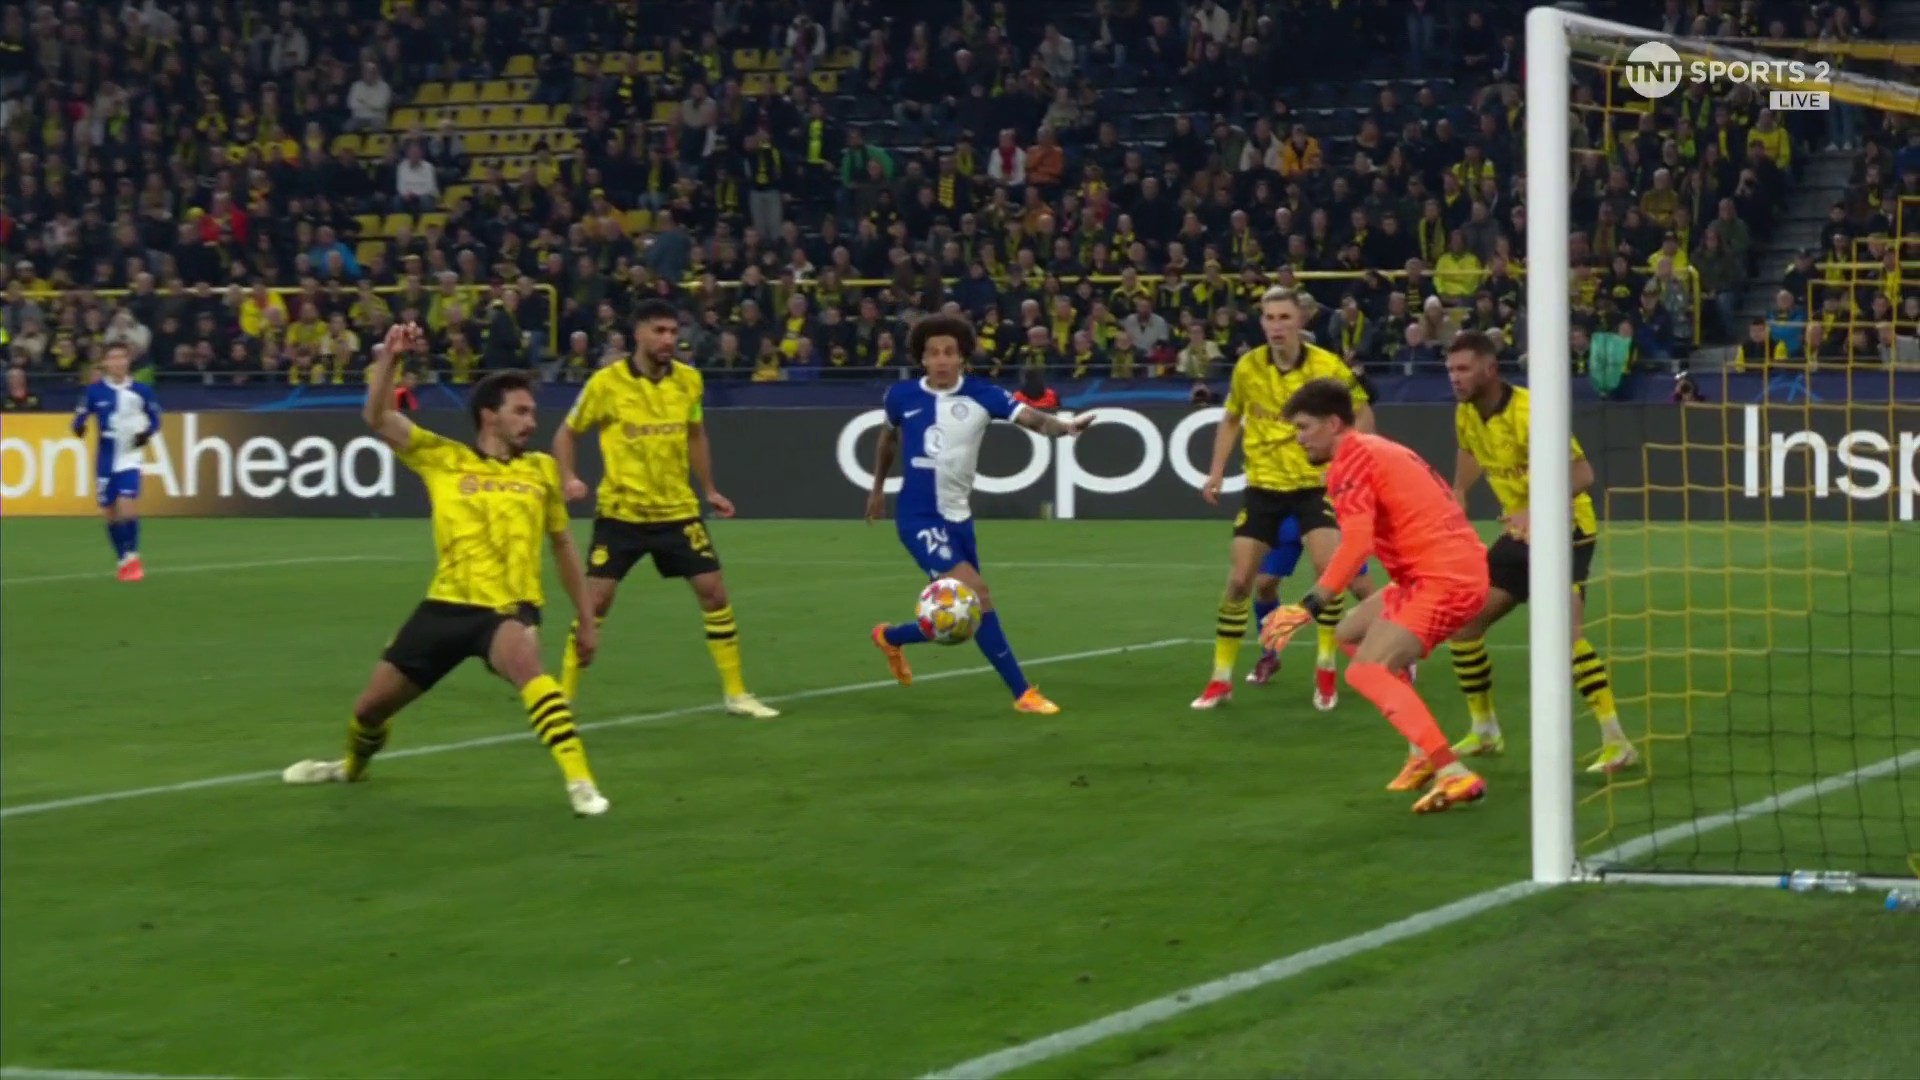 WATCH: Own goal bring Atletico Madrid back level on aggregate with Borussia Dortmund